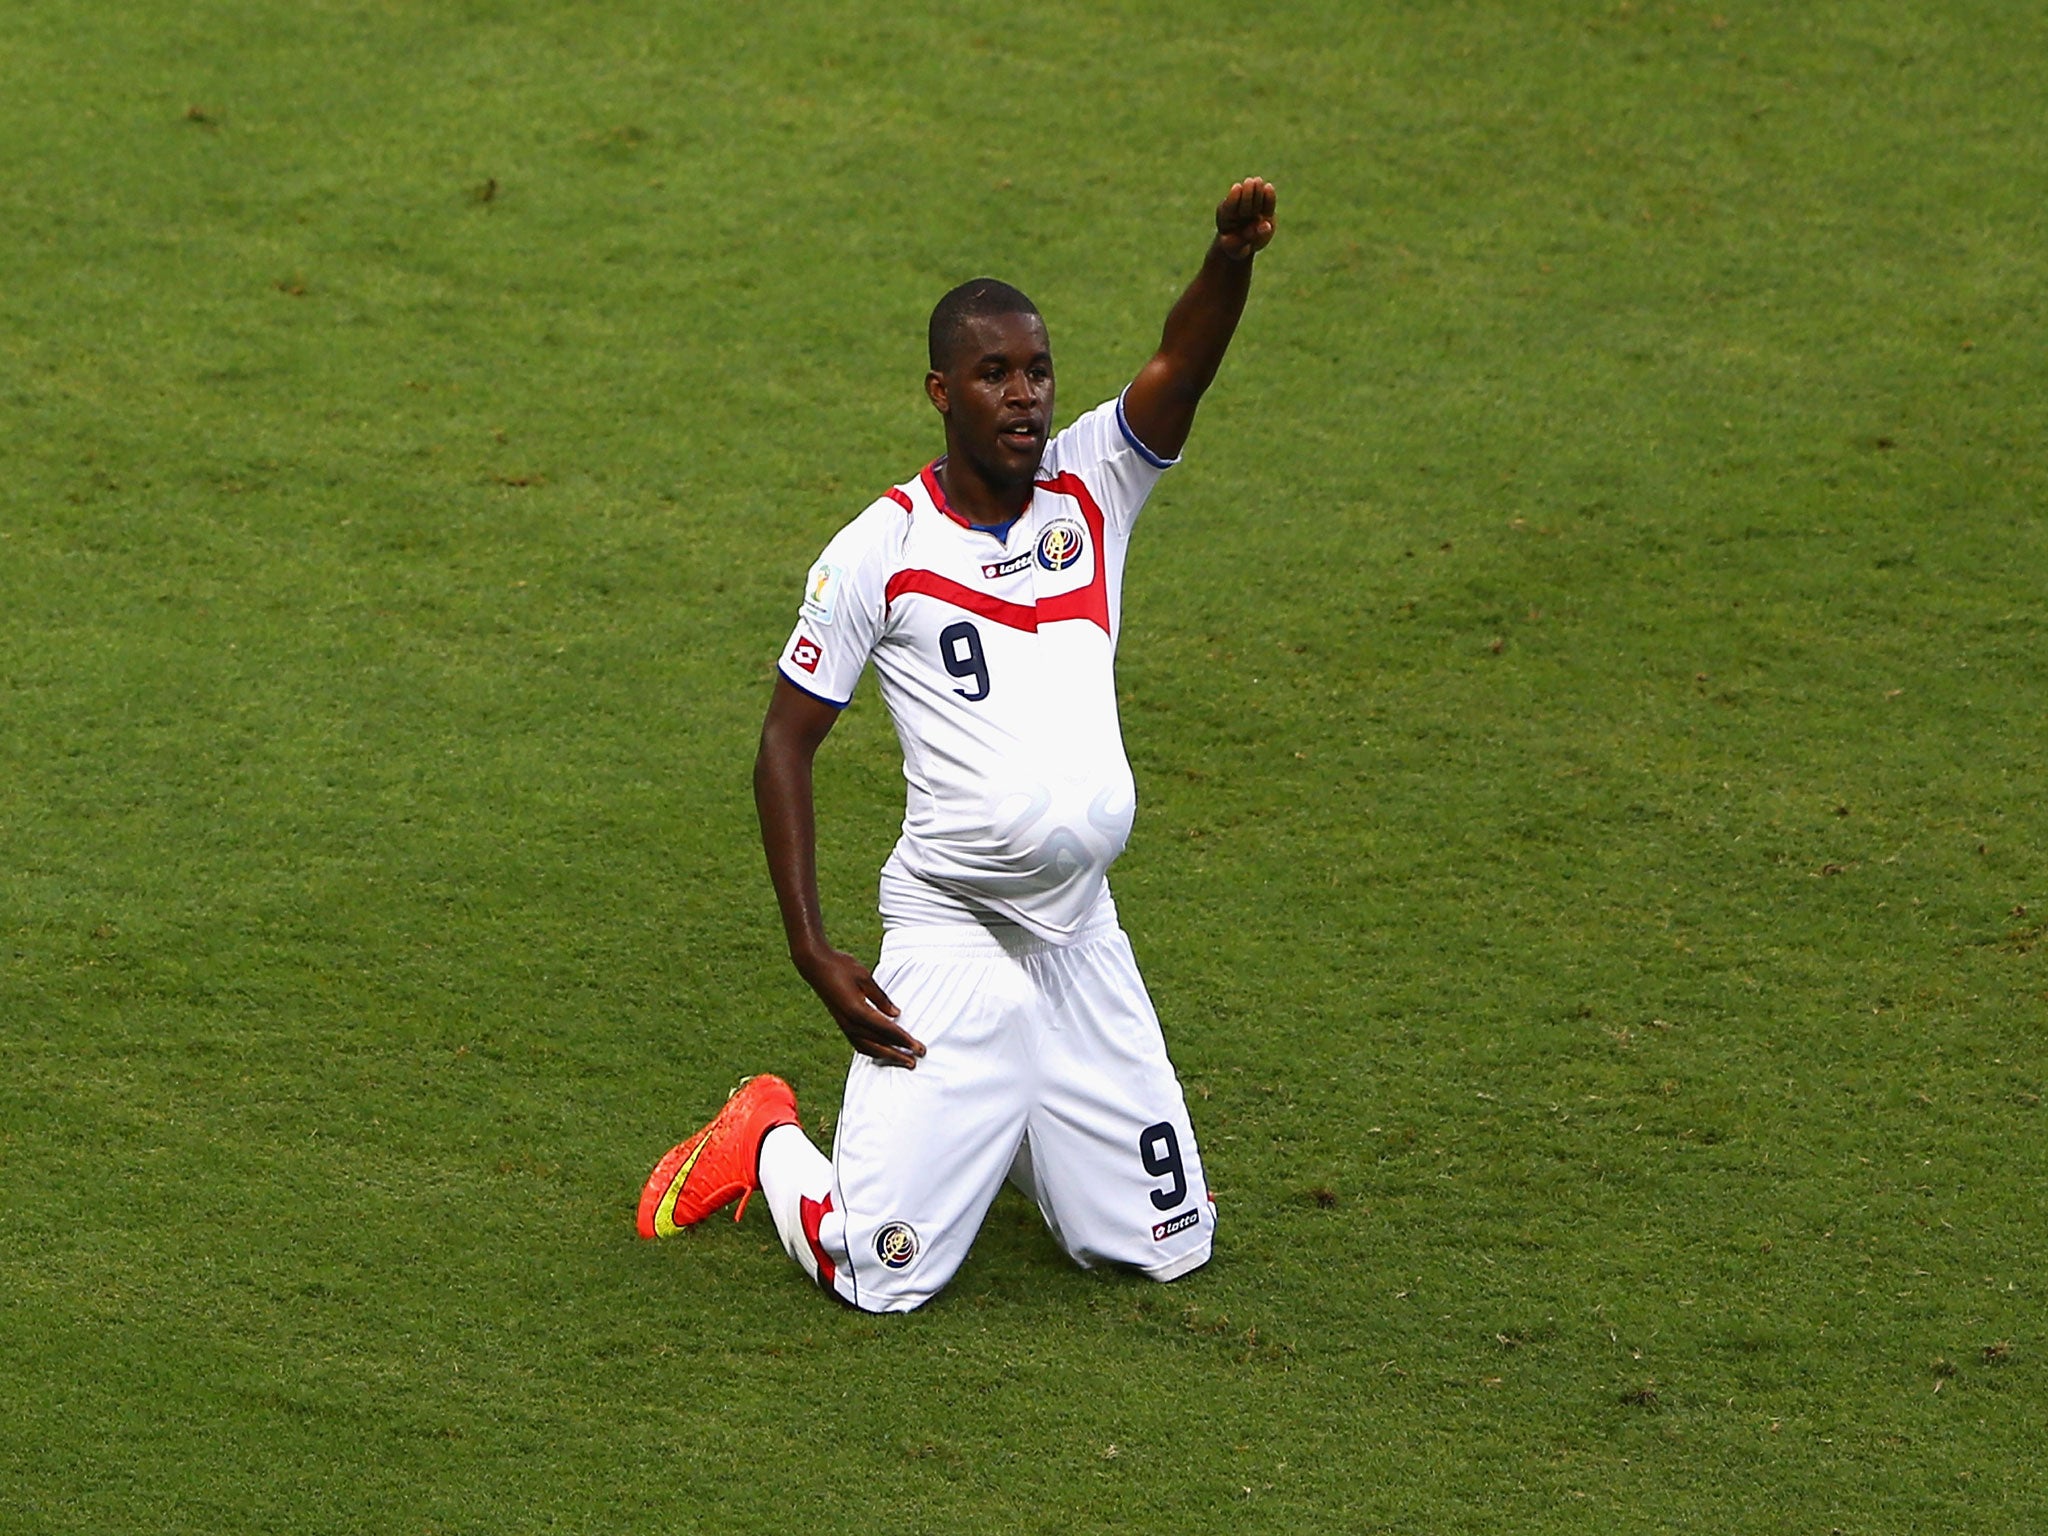 Joel Campbell will feature for Costa Rica